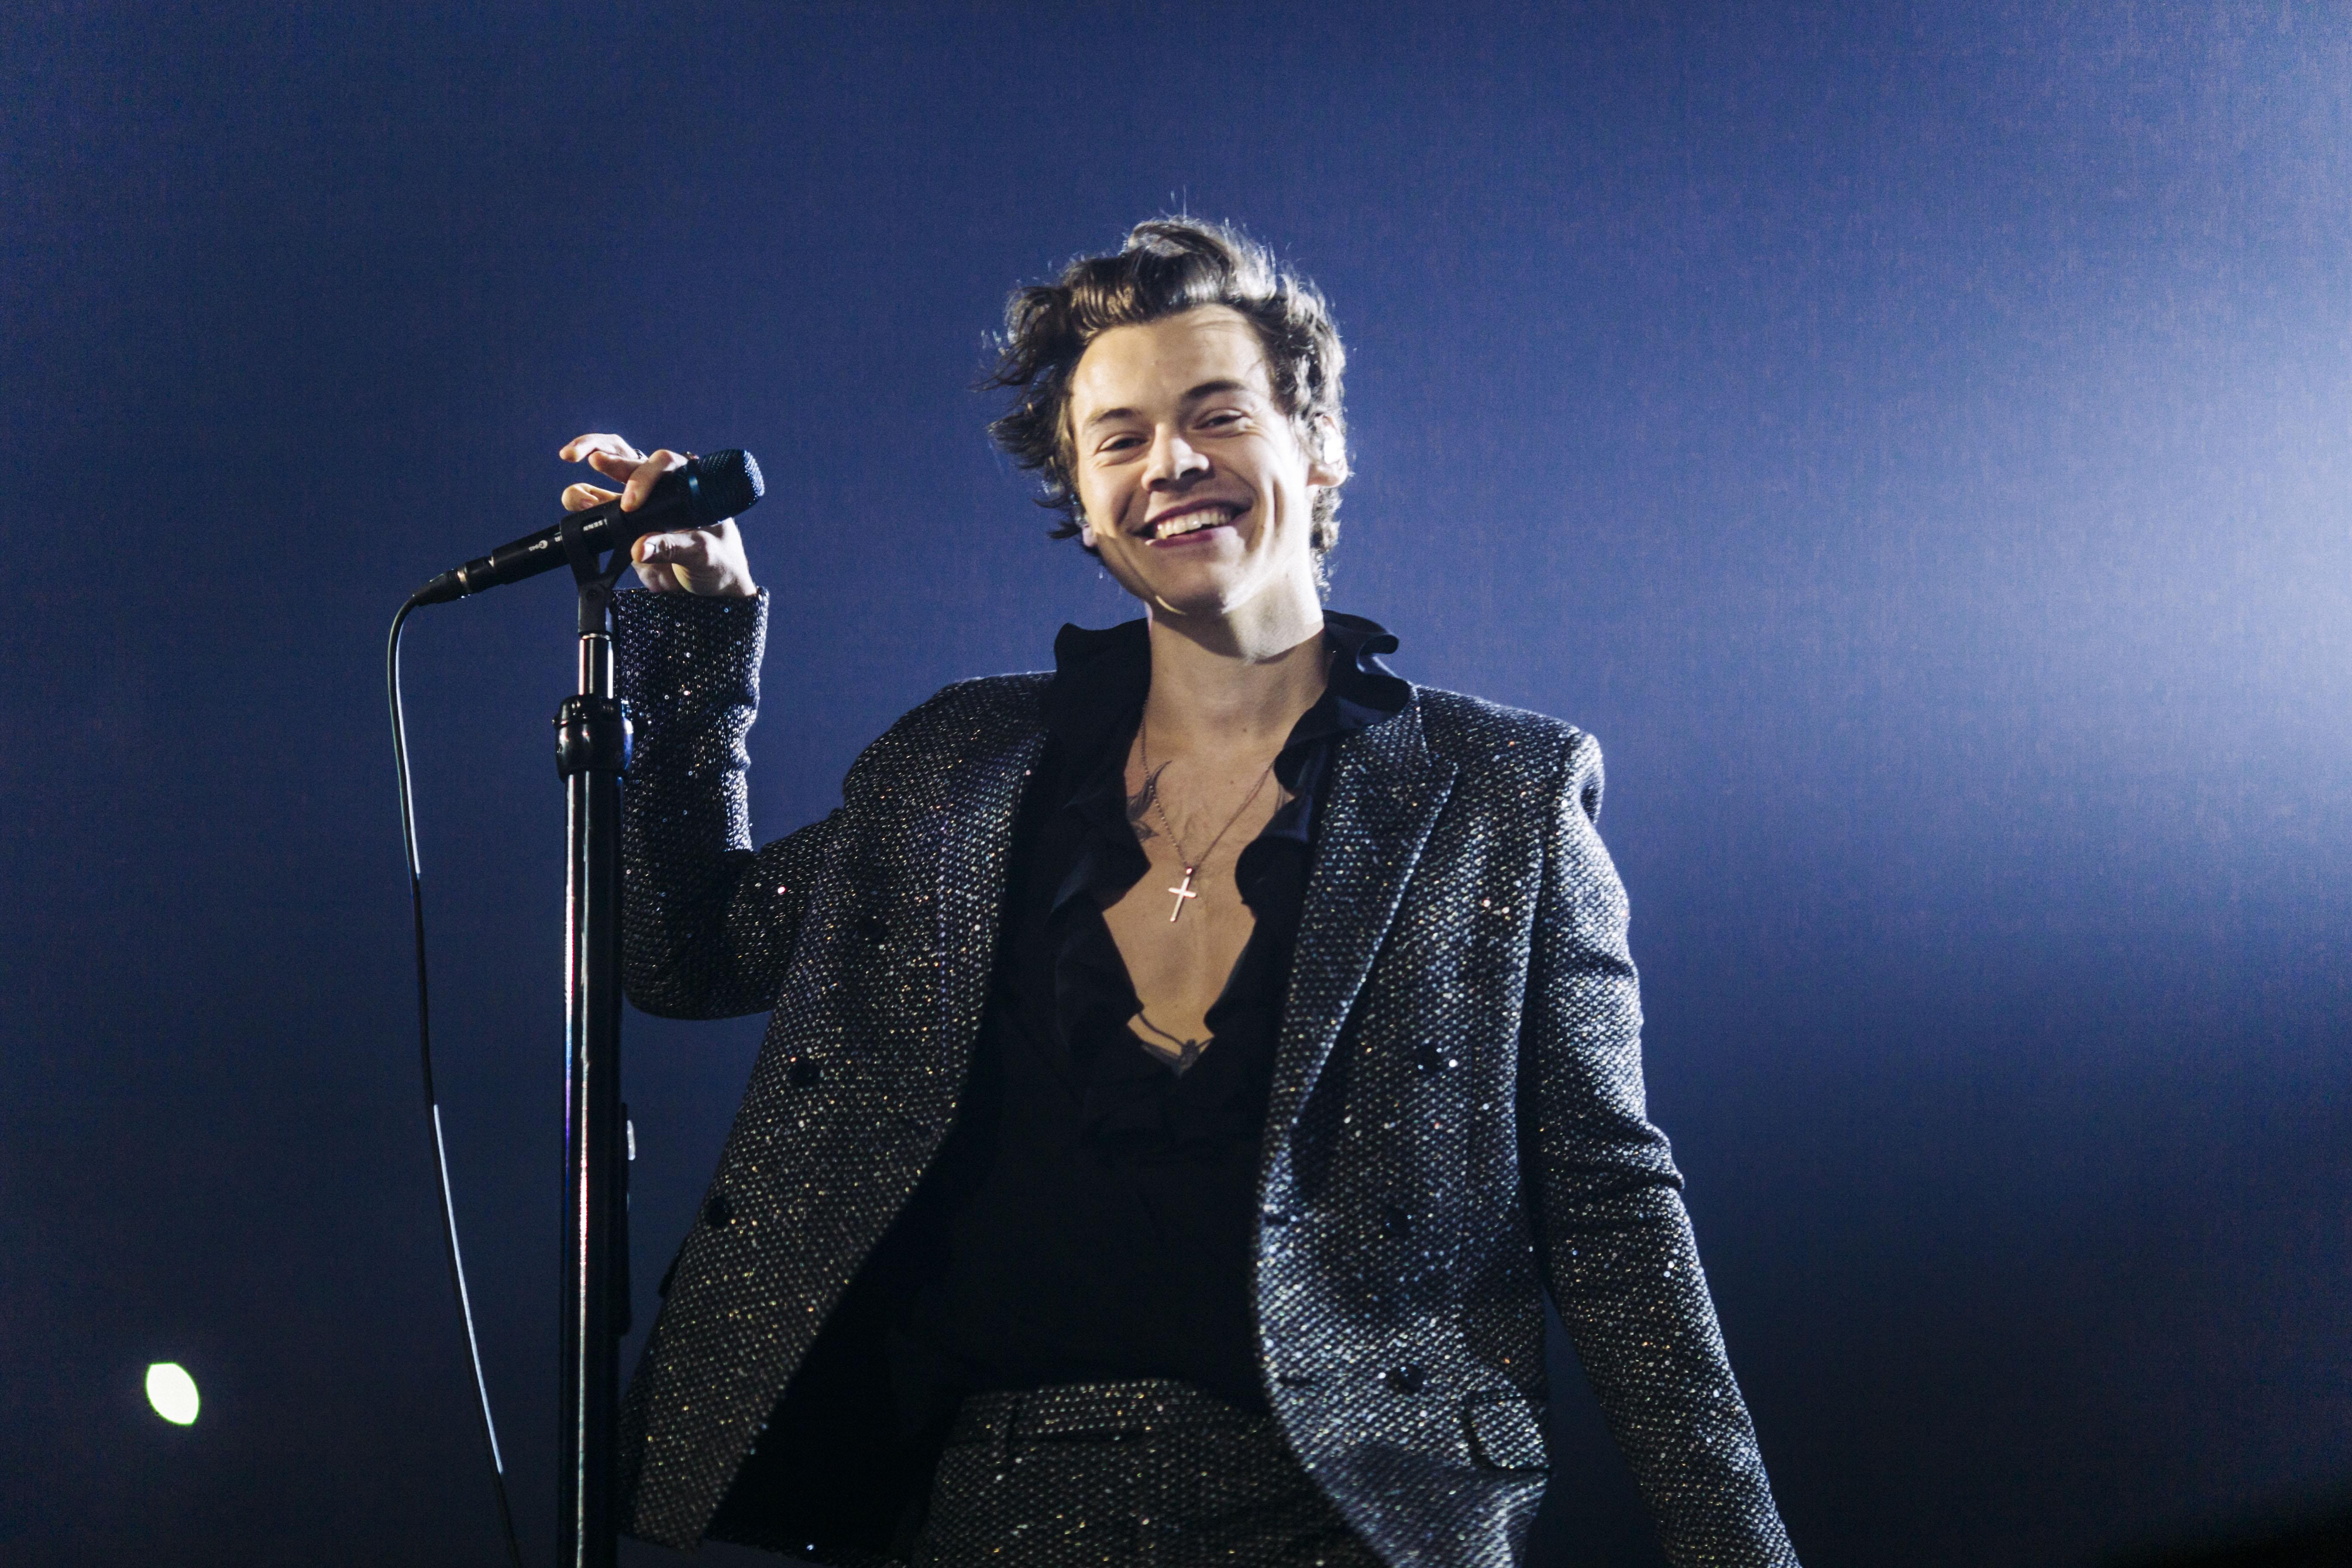 ‘Treat People With Kindness’ Is My 2021 Anthem Thanks To Harry Styles [WATCH]